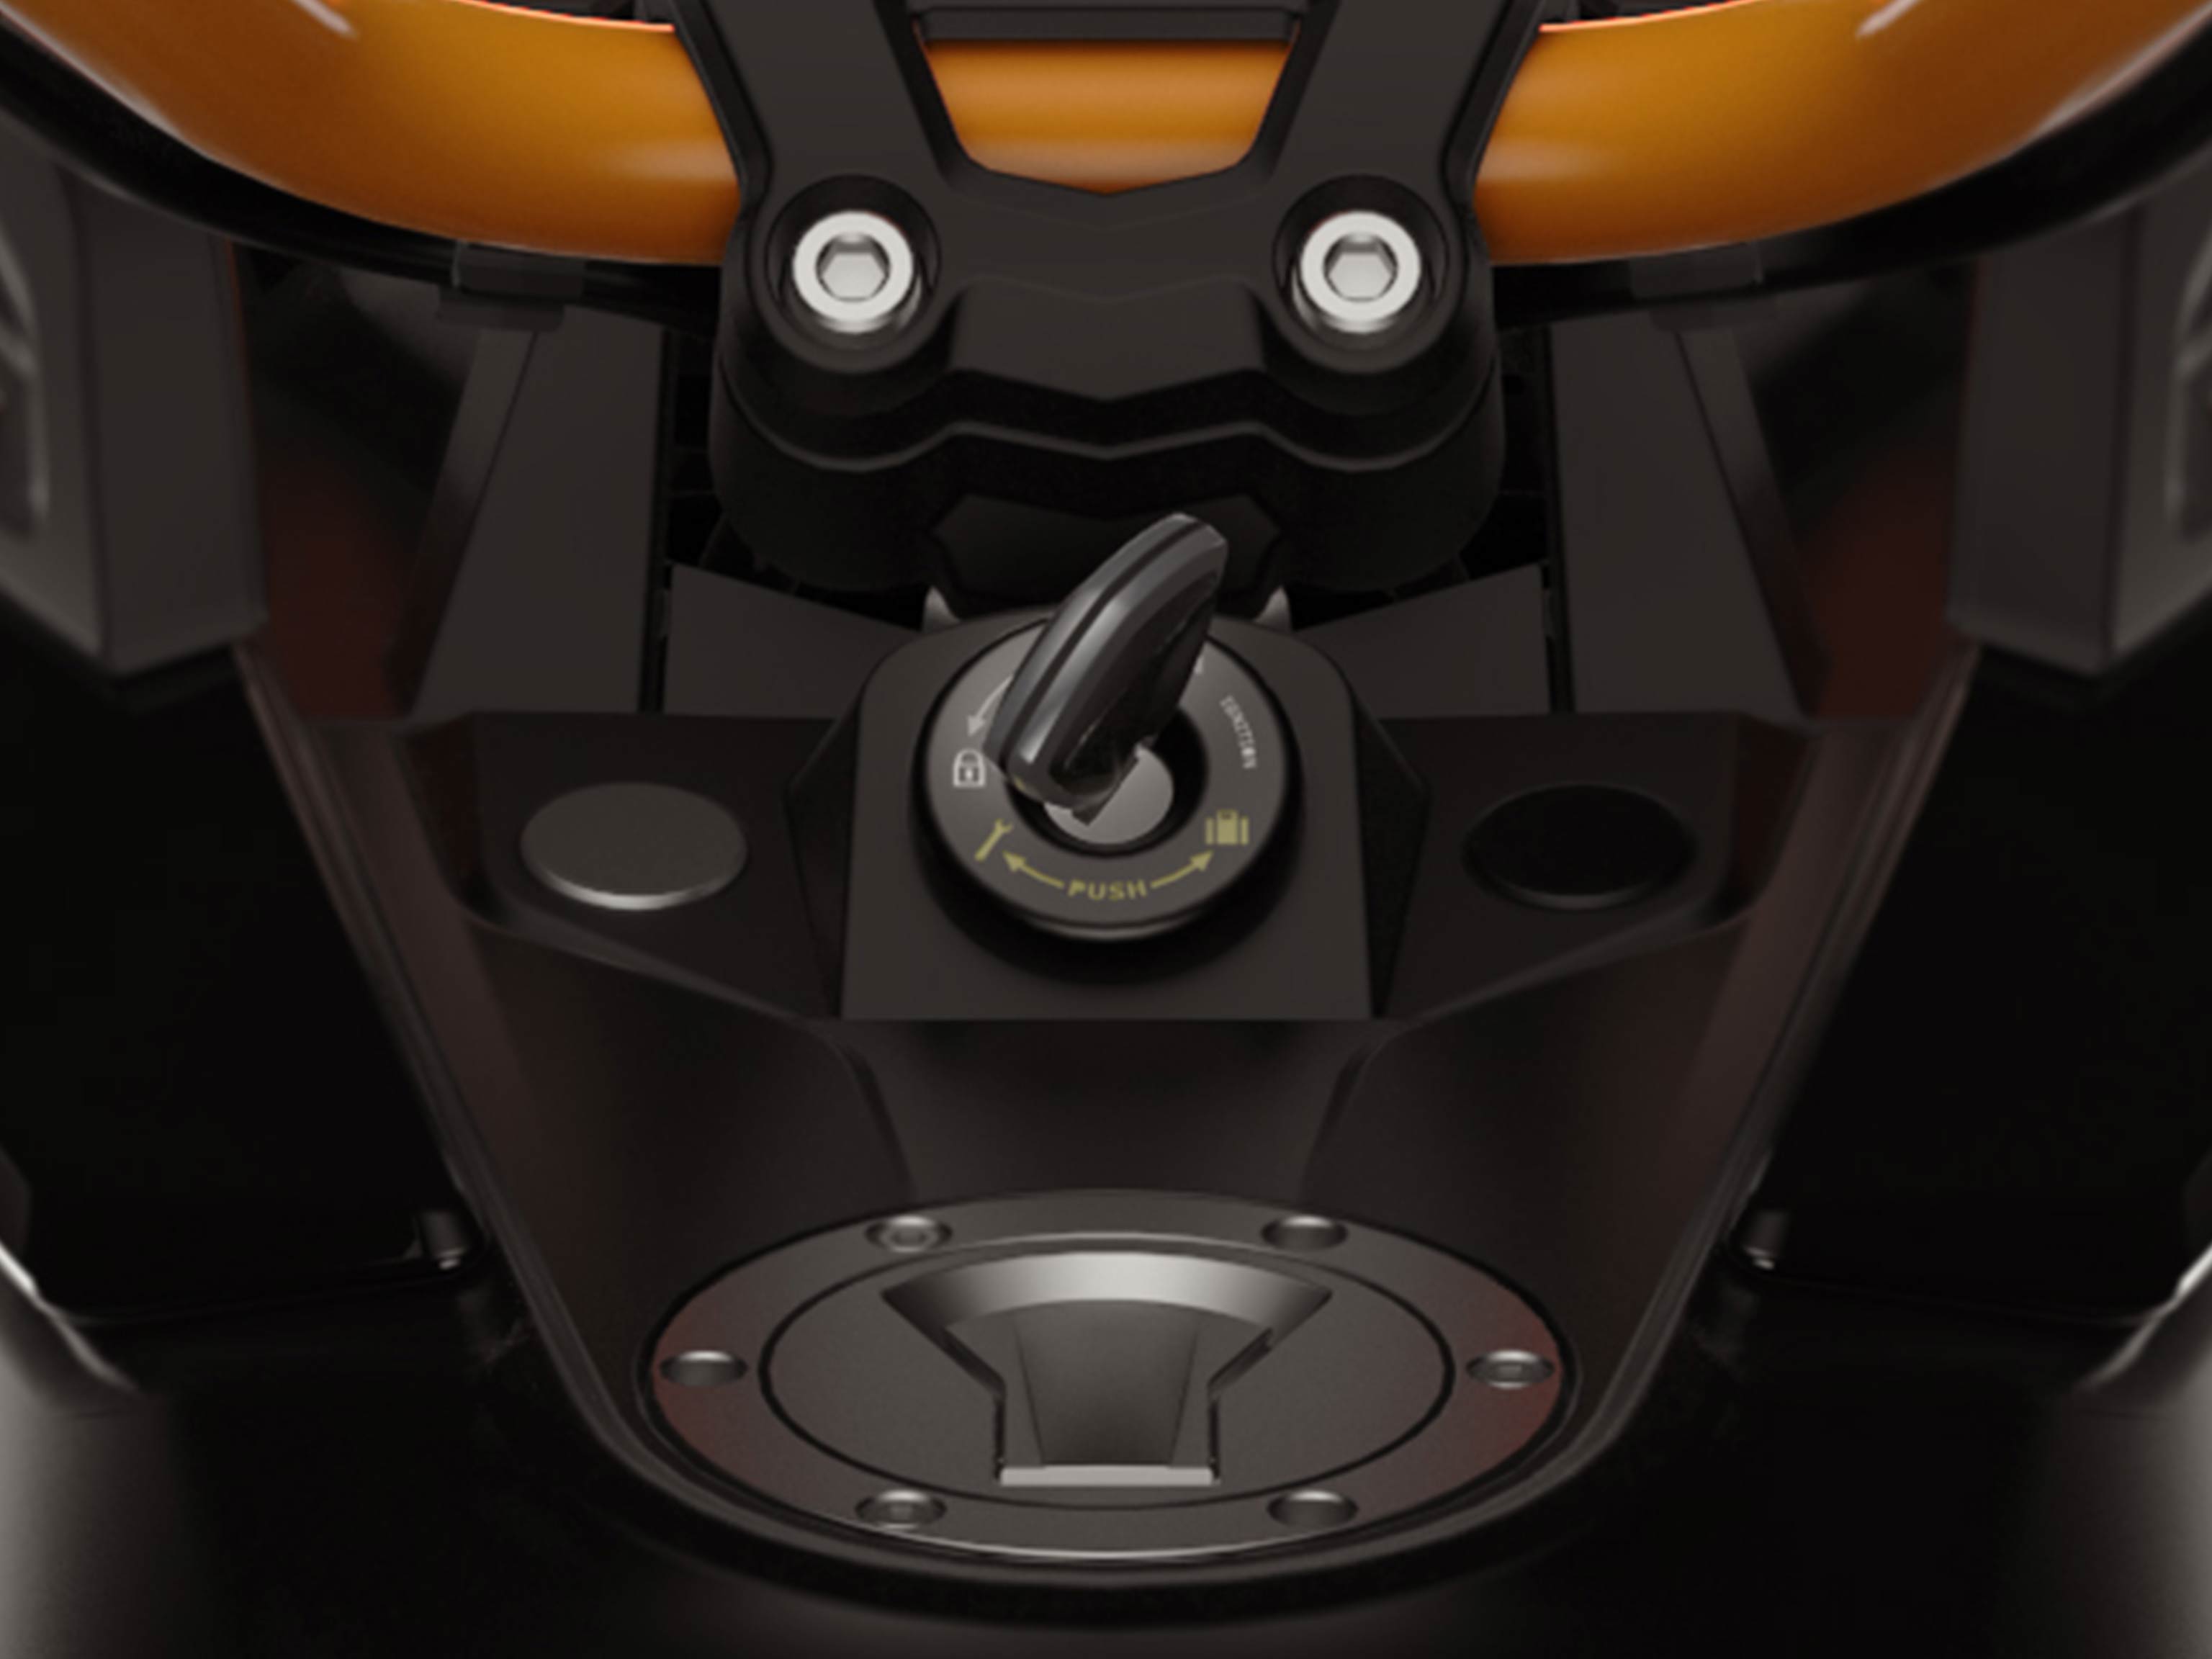 The anti-theft technology on the Can-Am Spyder 